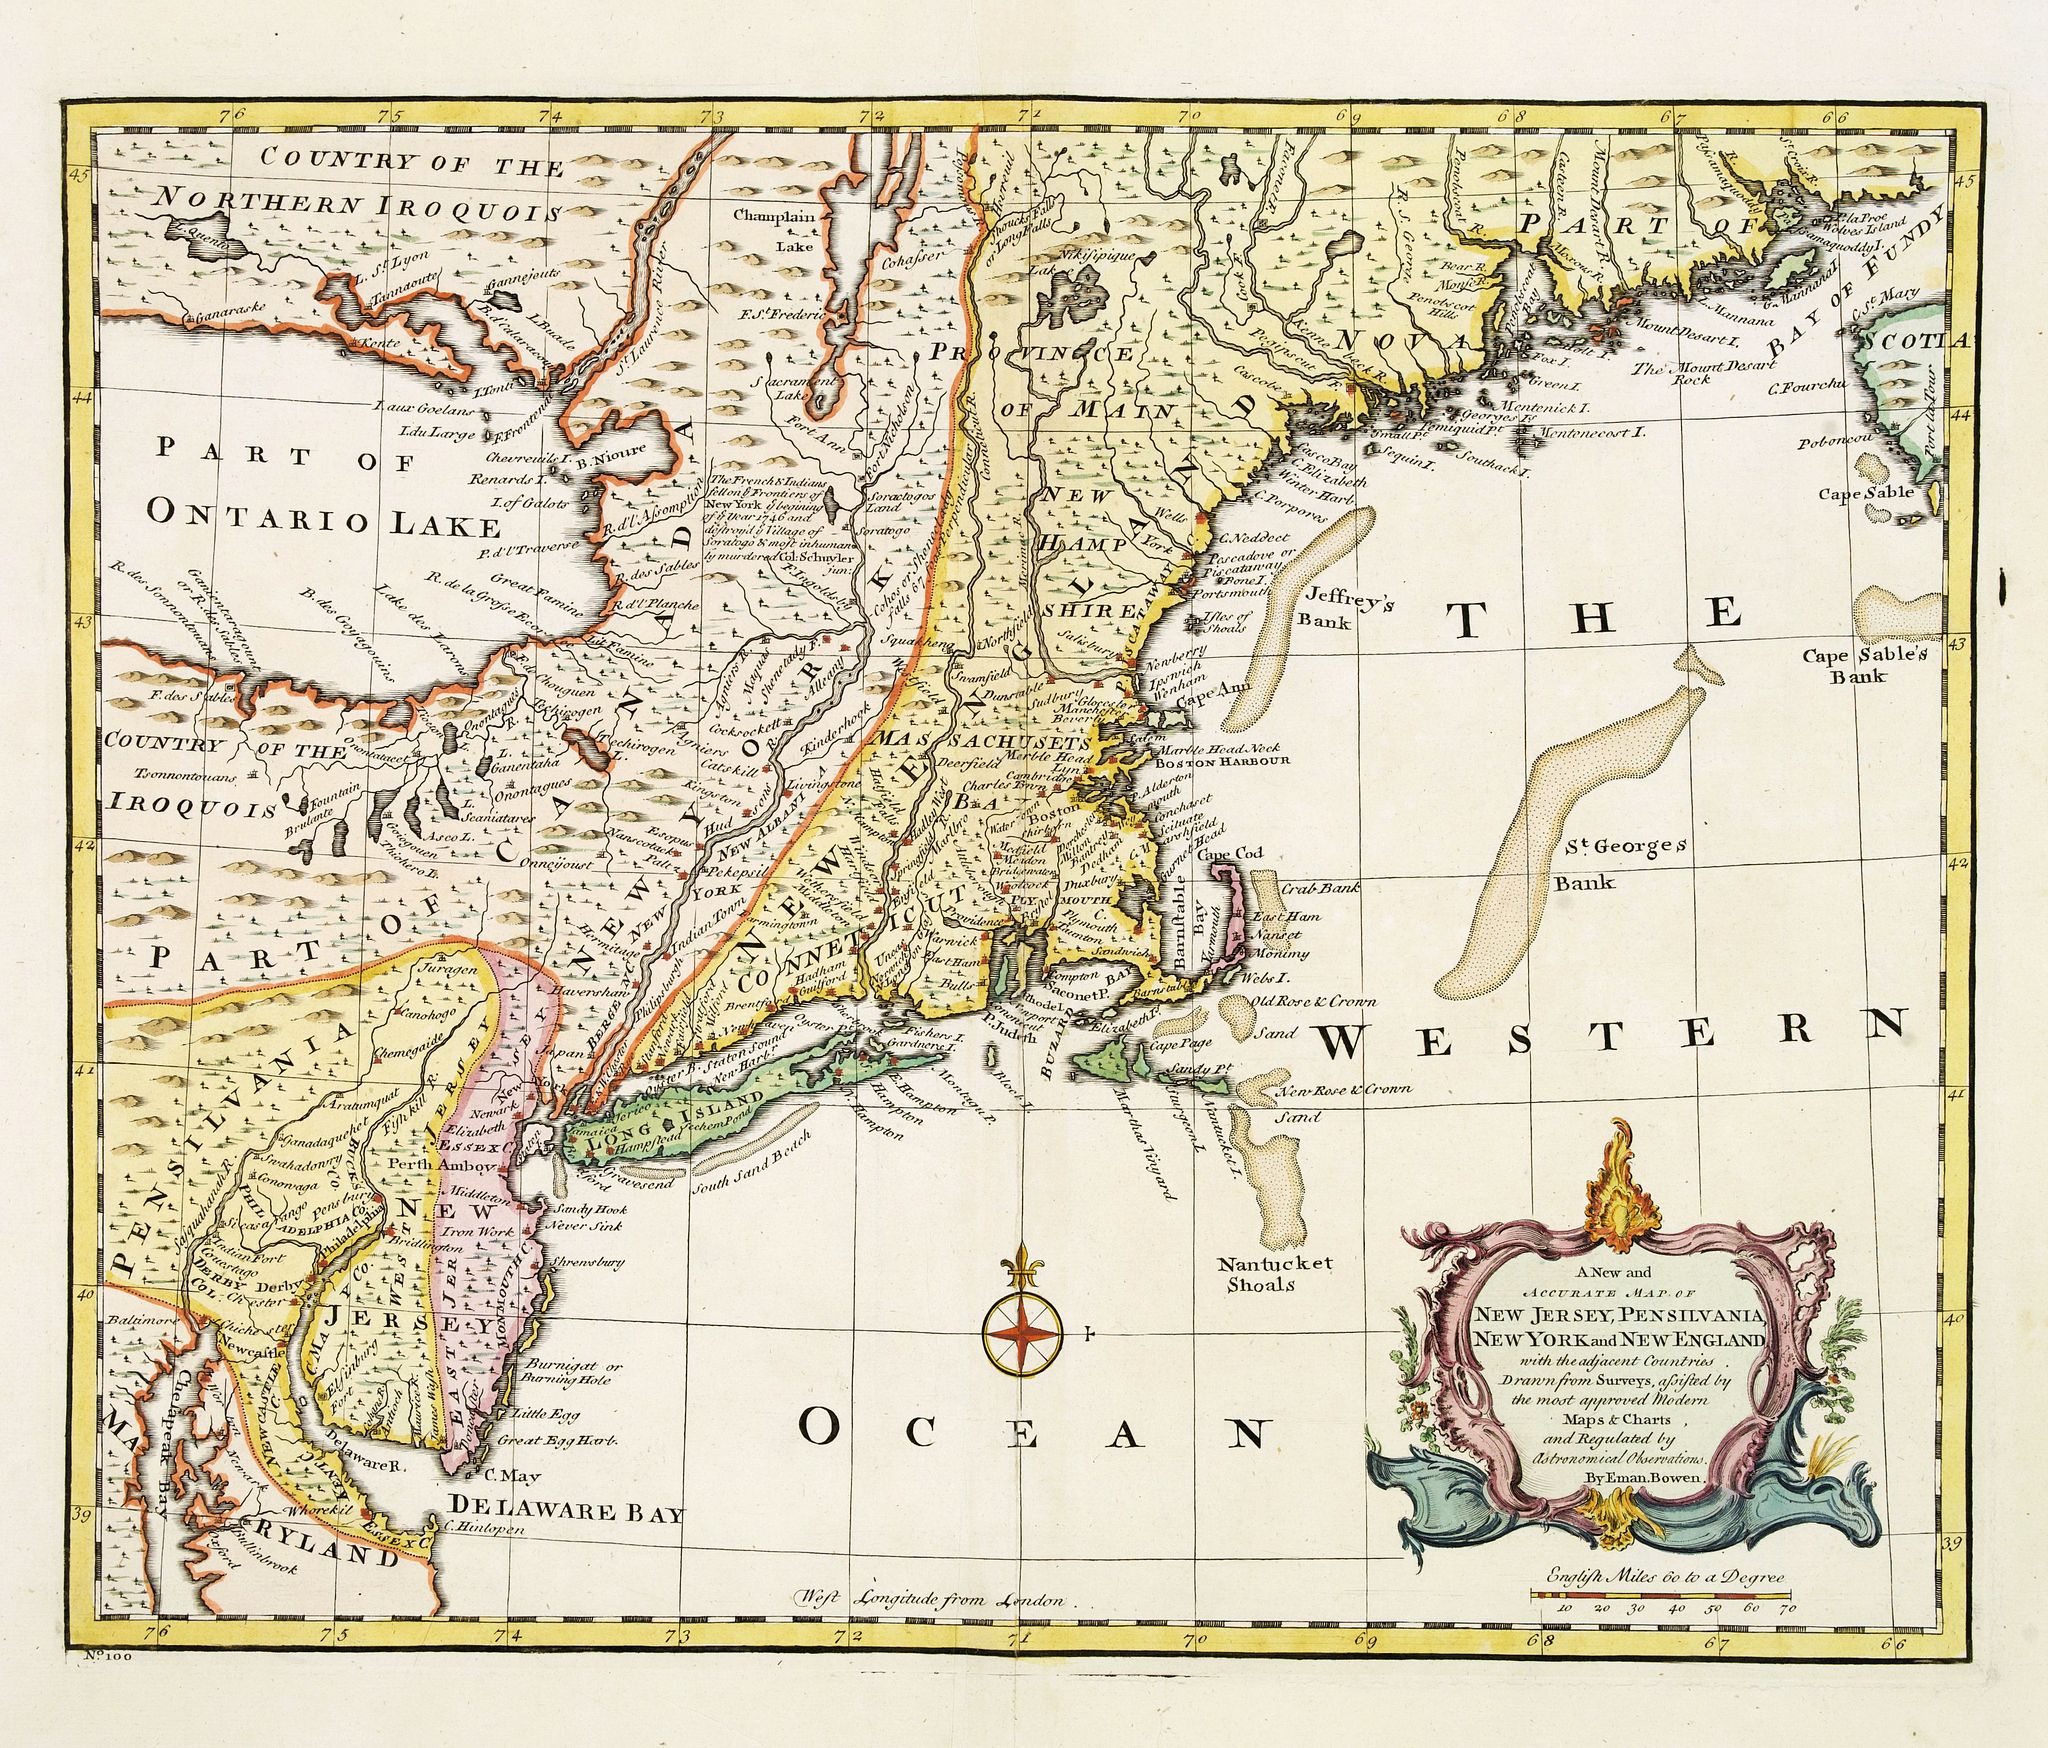 A new and accurate map of New Jersey, Pensilvania, New York and New England with the Adjacent Countries. . .